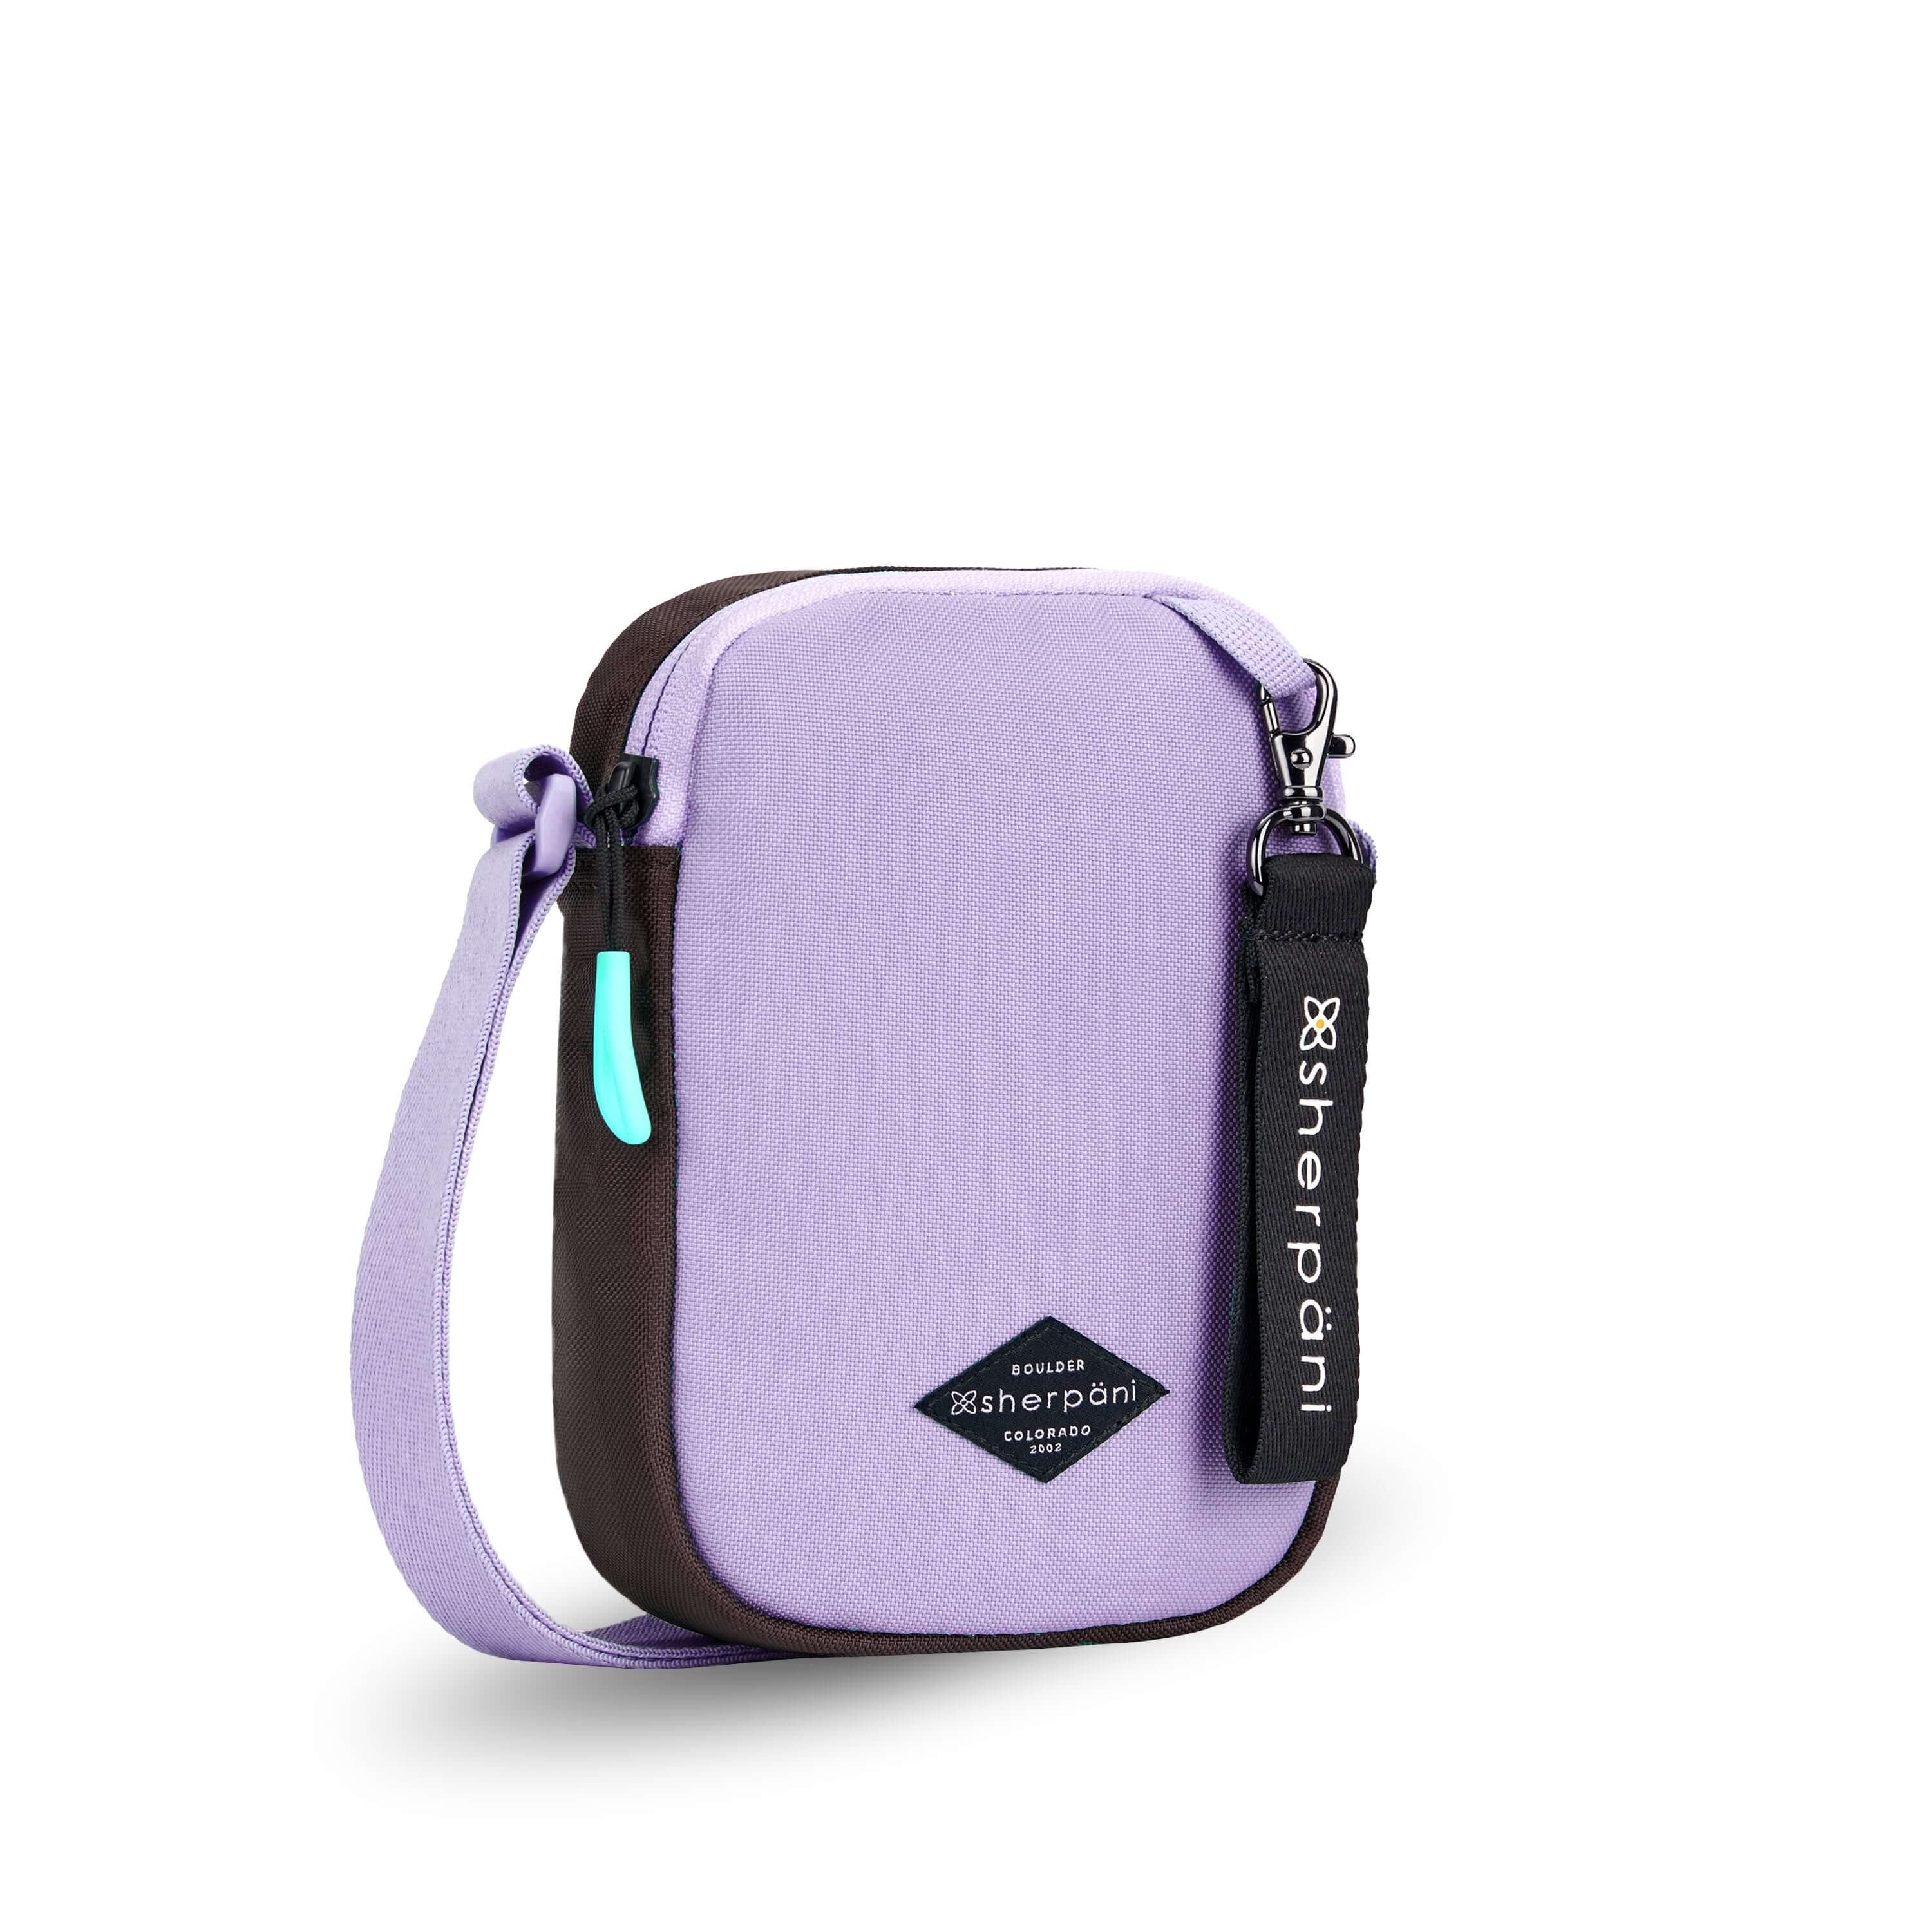 Angled front view of Sherpani crossbody, the Rogue in Lavender. The bag is two toned: the front is lavender and the back is brown. The main zipper compartment features an easy-pull zipper accented in aqua. The bag has an adjustable crossbody strap. A branded Sherpani keychain is clipped to a fabric loop on the top right corner. #color_lavender